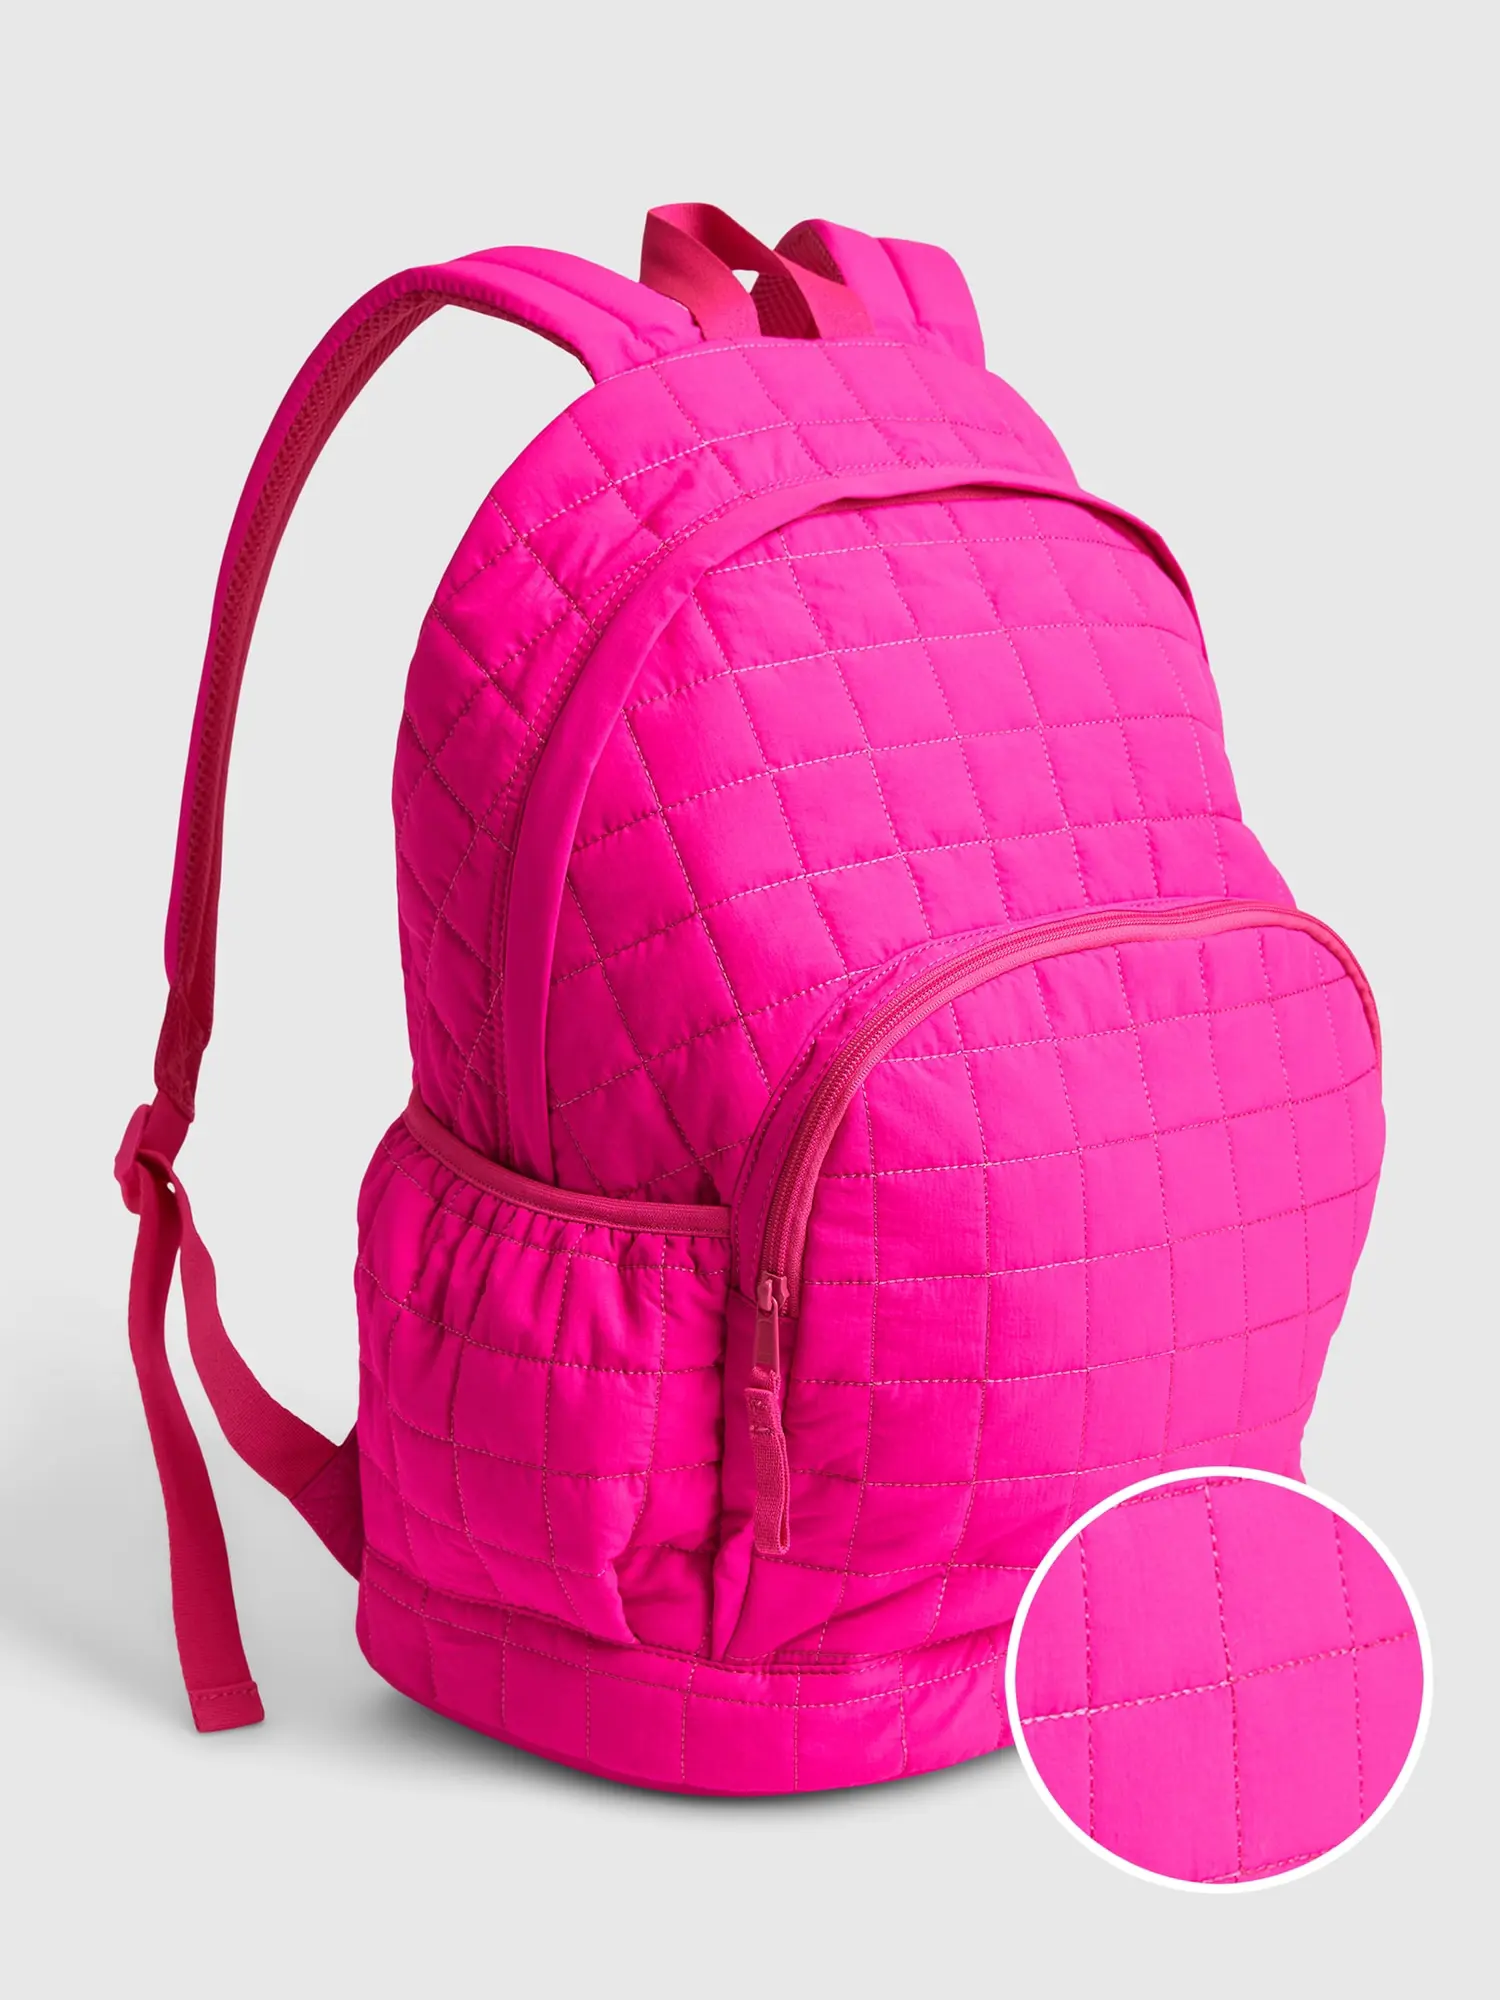 Gap Kids Nylon Quilted Backpack pink. 1